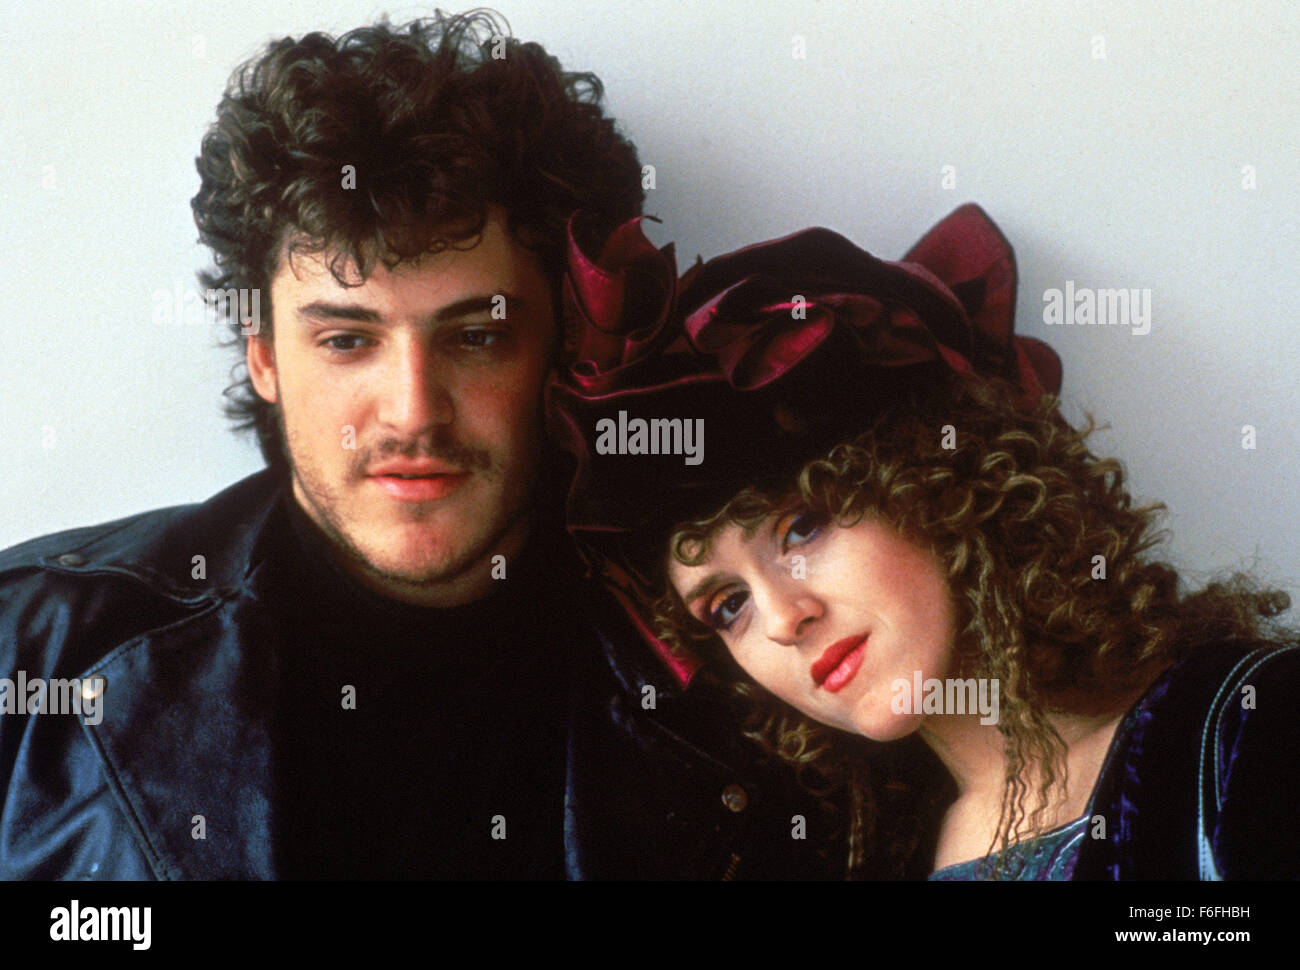 Nov 05, 1989; Hollywood, CA, USA; BERNADETTE PETERS and CHRIS SARANDON star as Eleanor and Victor Okrent in the drama 'Slaves of New York' directed by James Ivory. Stock Photo